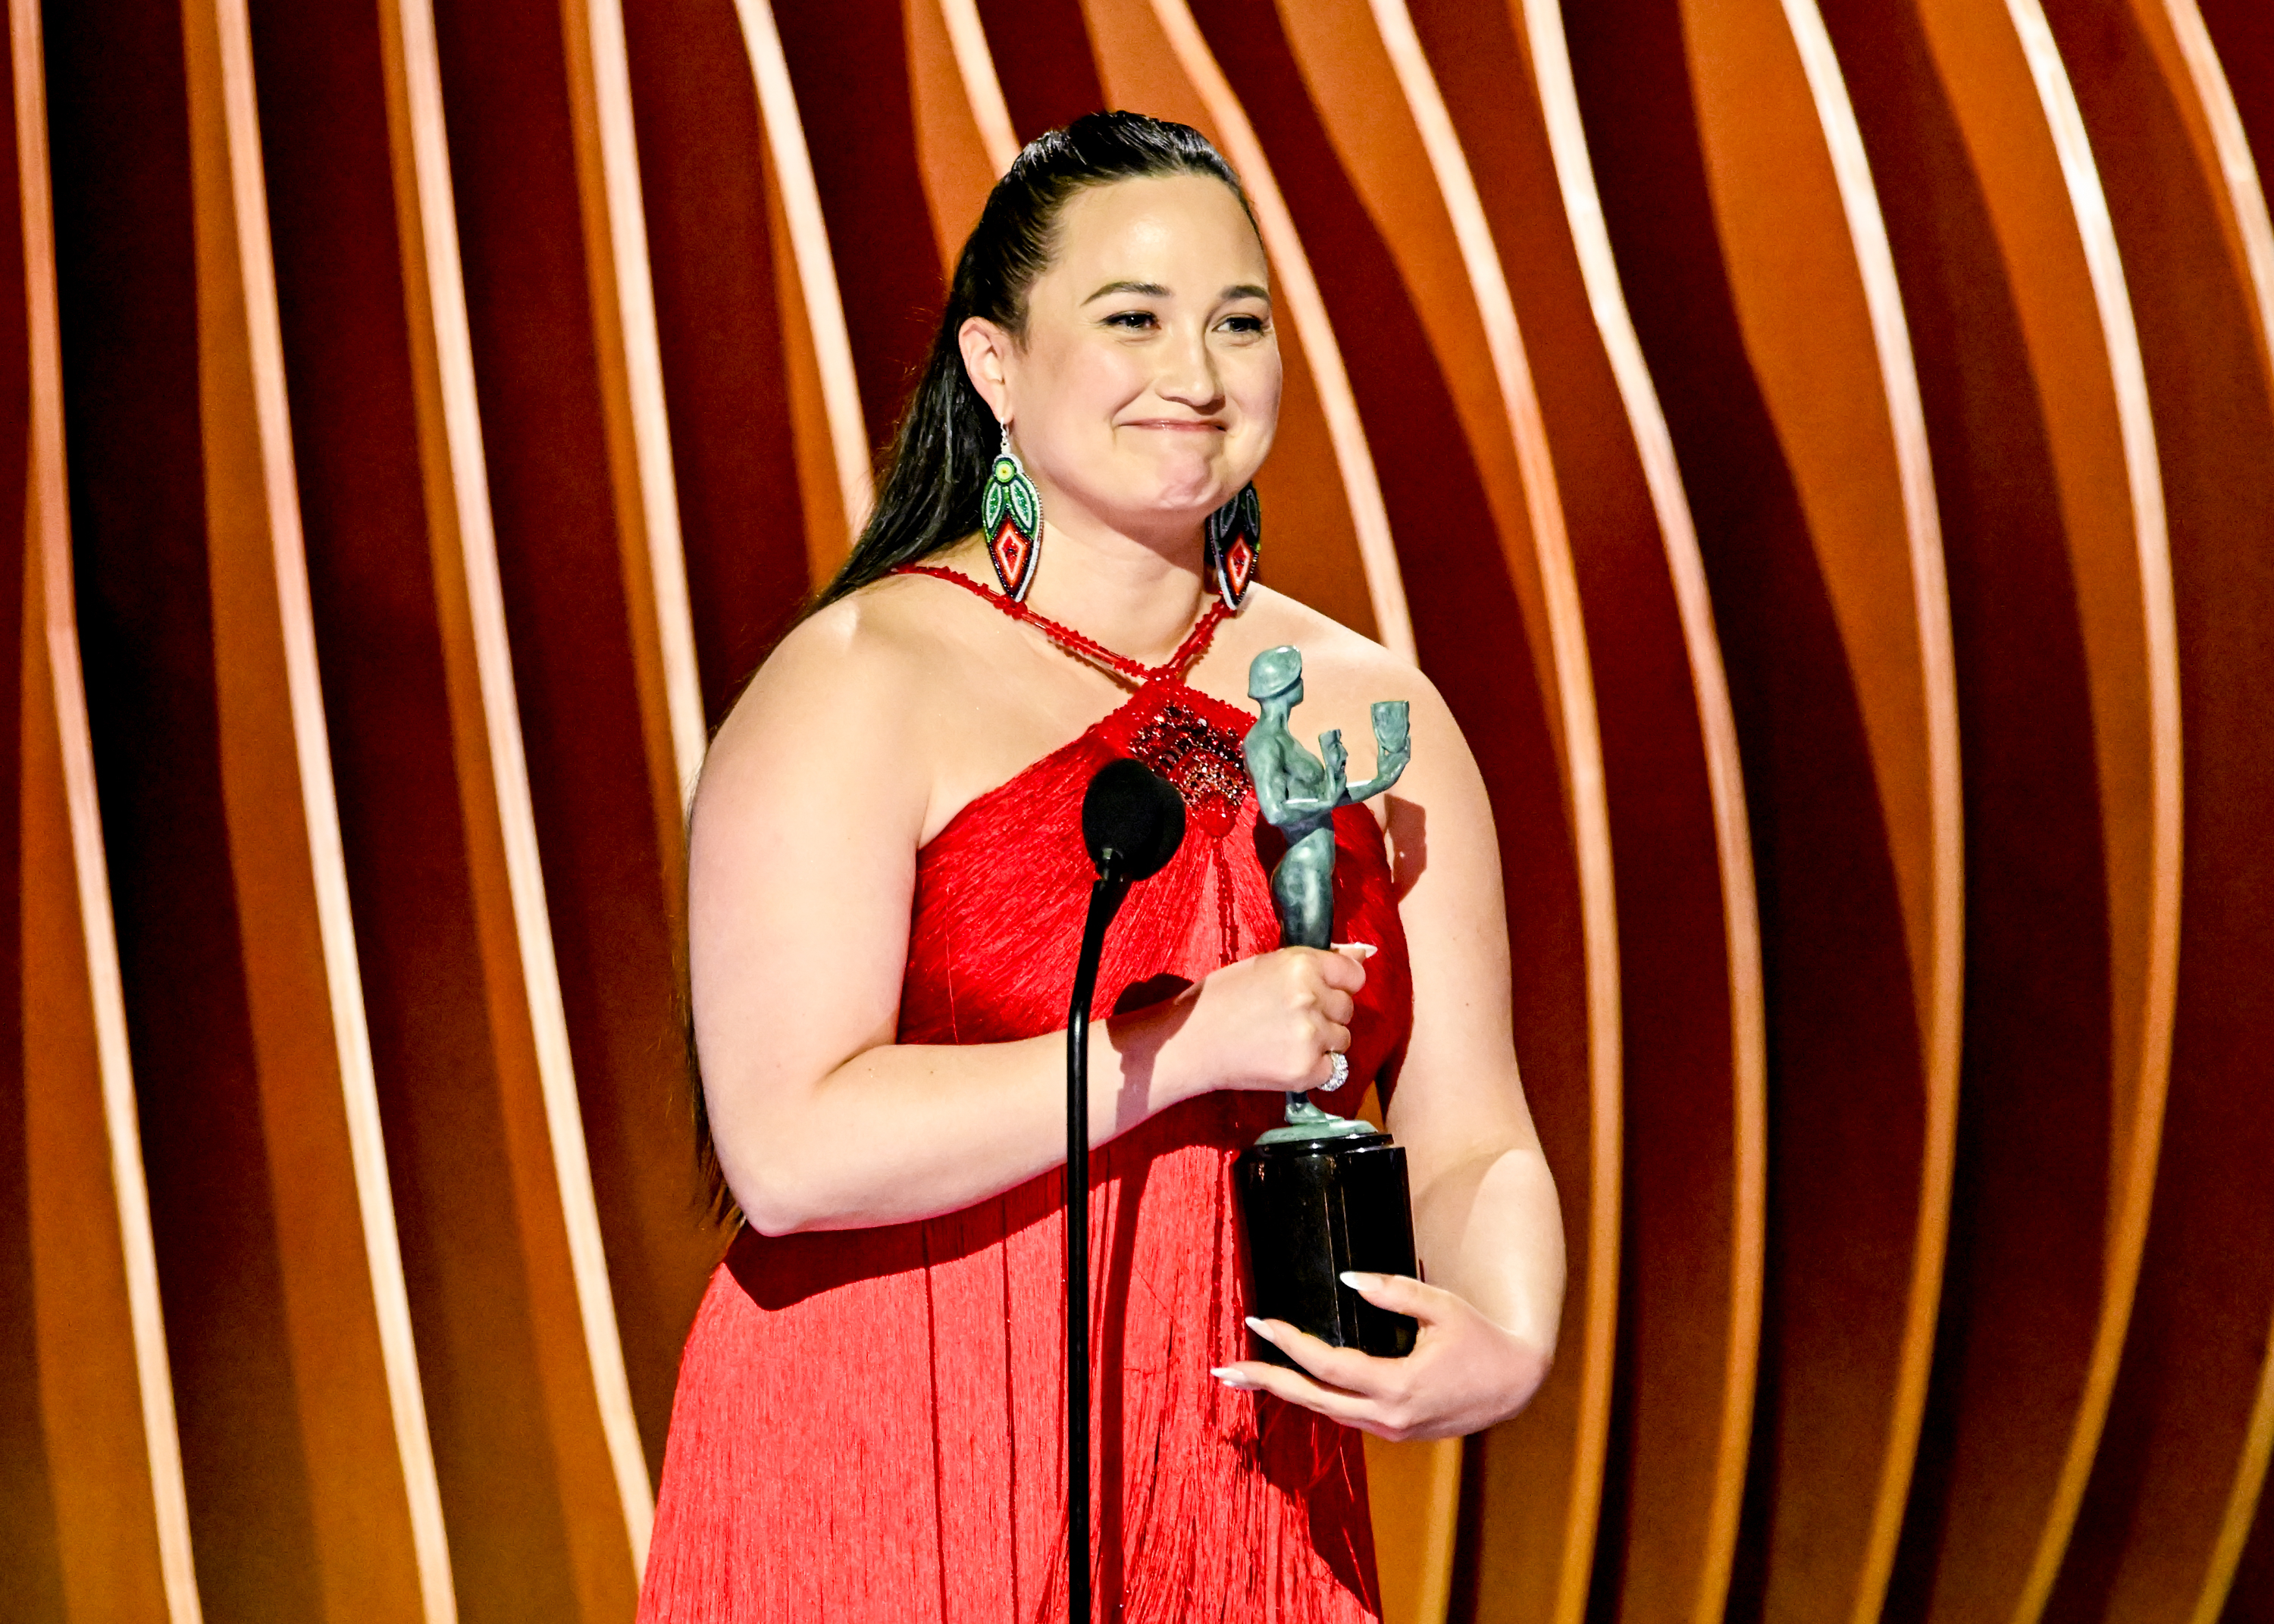 Lily Stone accepting her SAG Award